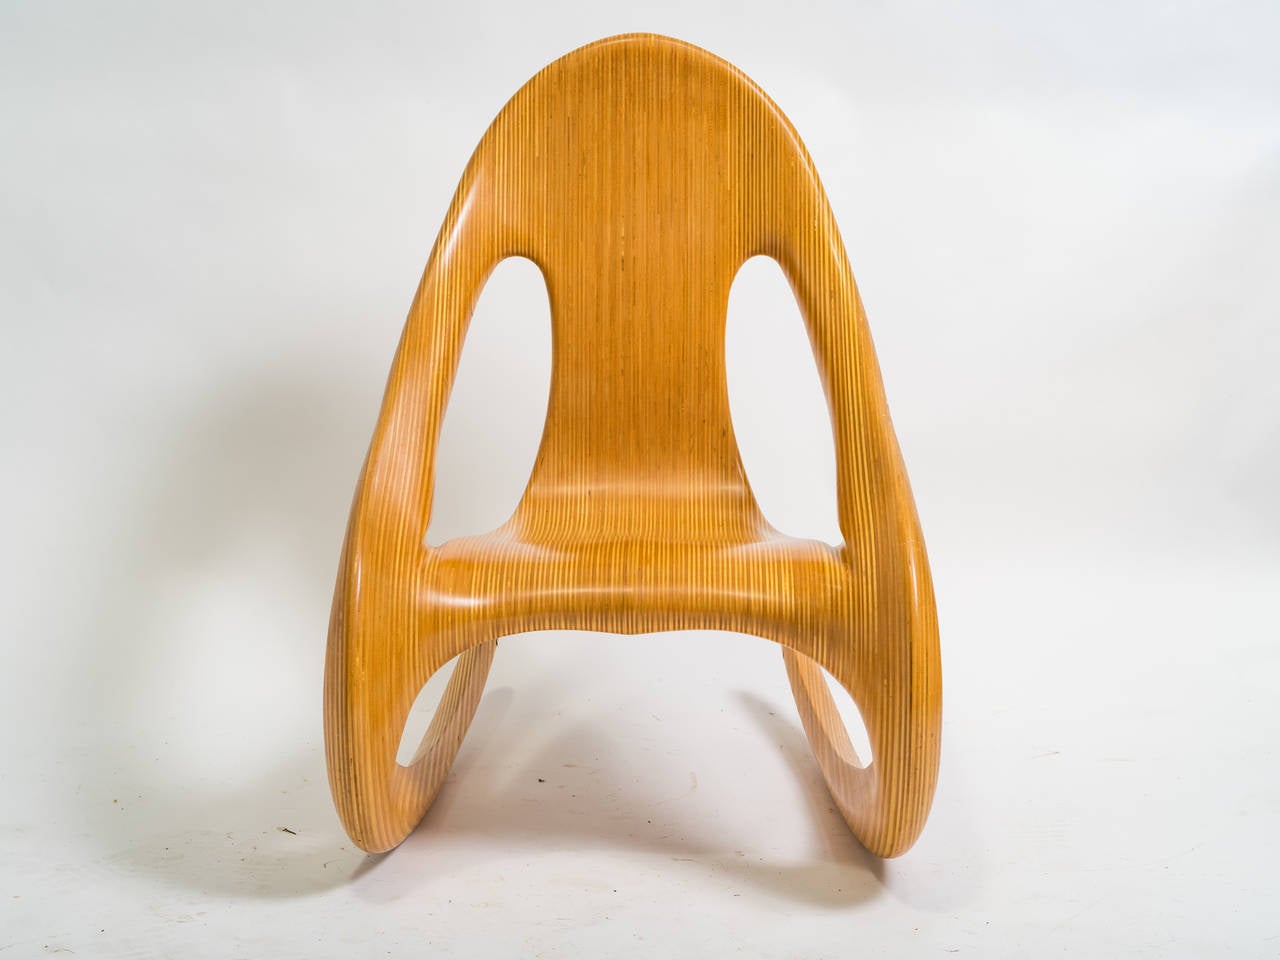 Very cool shaped rocker signed Carl Gromoll. It is dated 4/1983. Made of layered laminated birch.